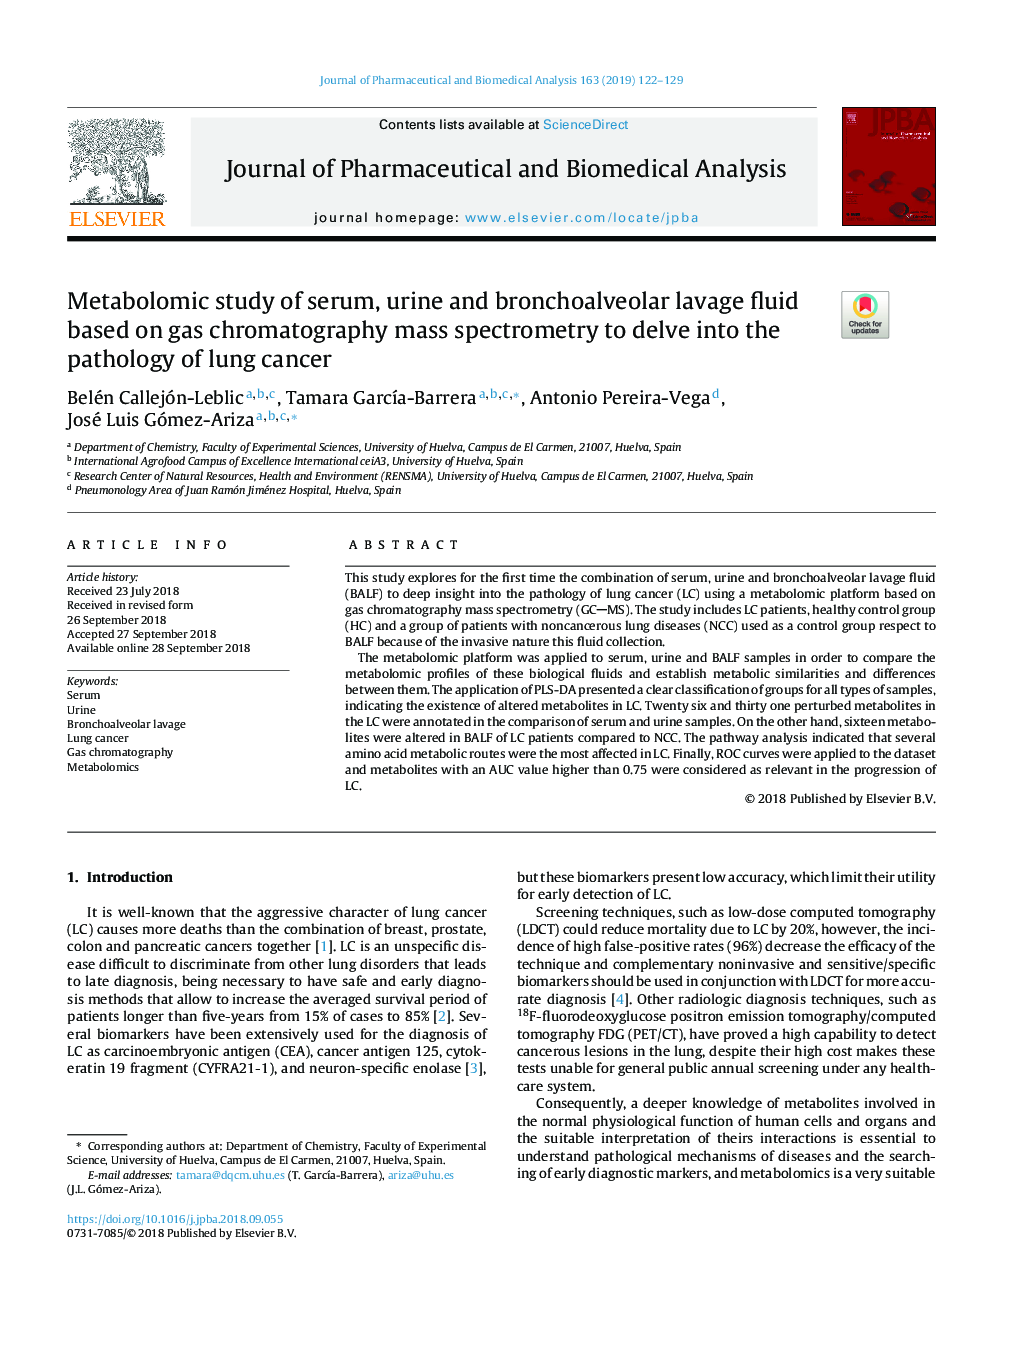 Metabolomic study of serum, urine and bronchoalveolar lavage fluid based on gas chromatography mass spectrometry to delve into the pathology of lung cancer